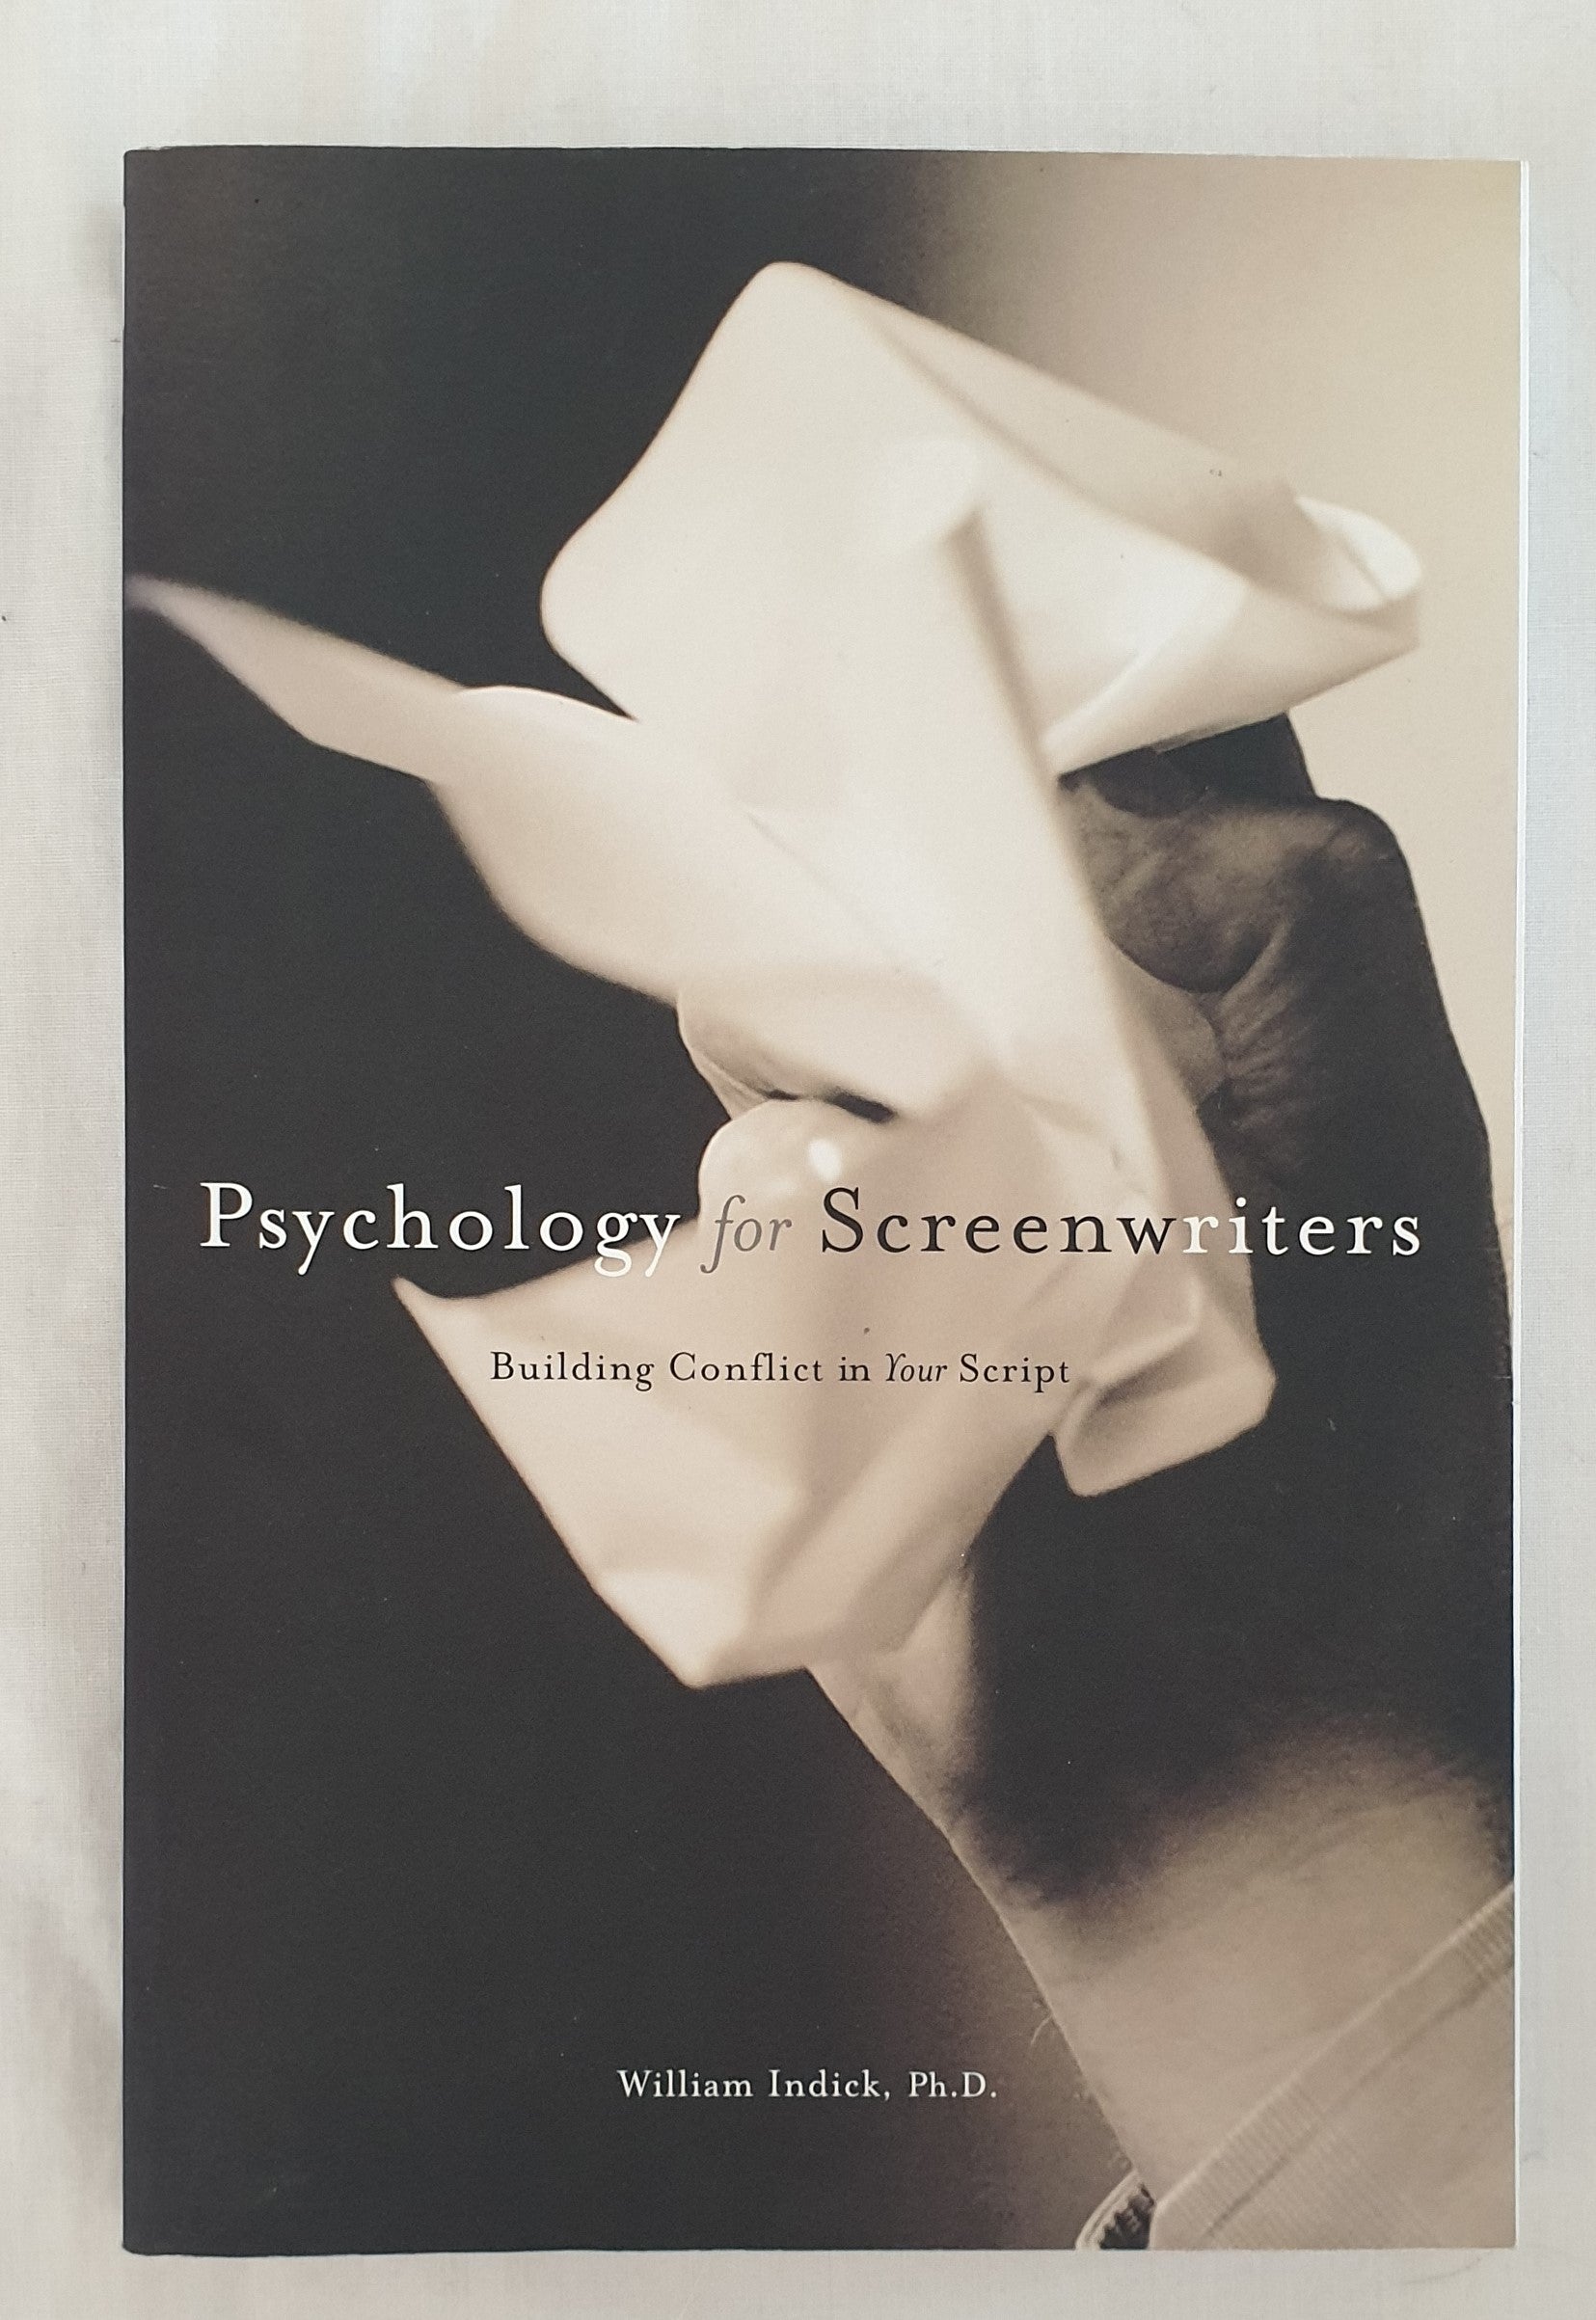 Psychology for Screenwriters by William Indick